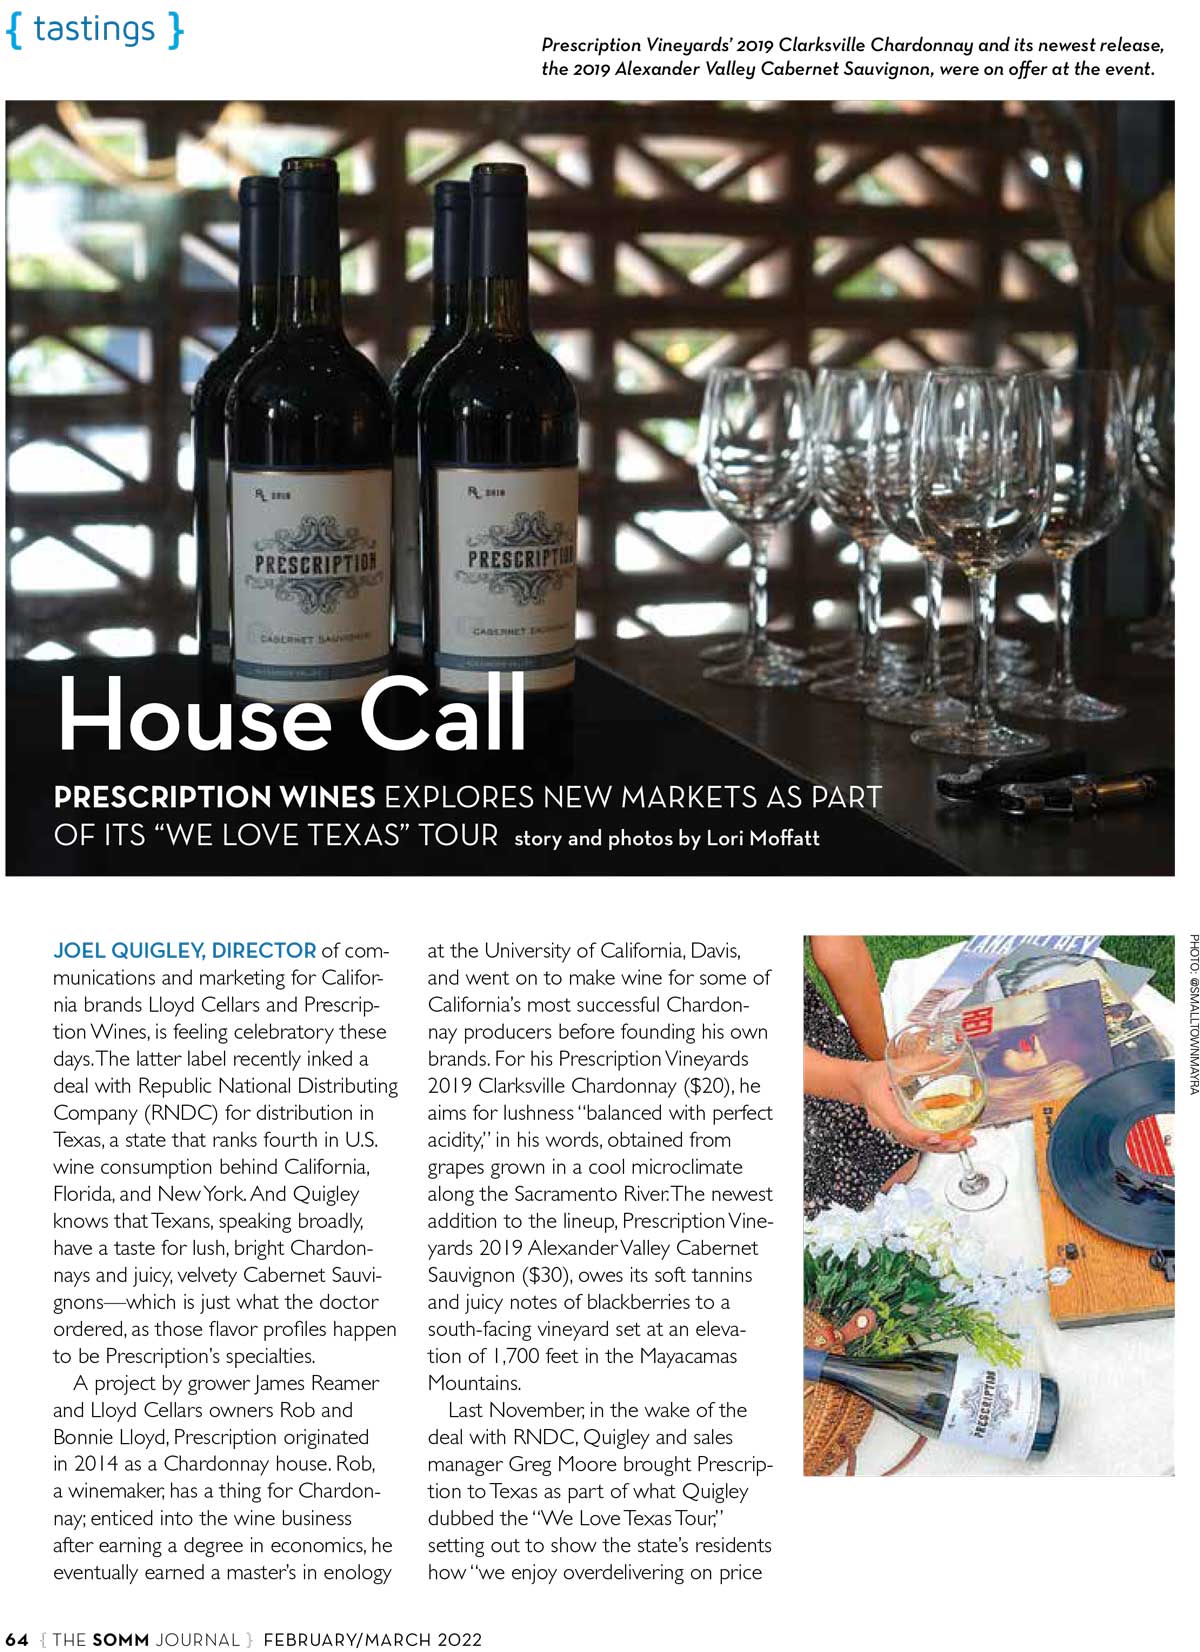 Somm Journal article page